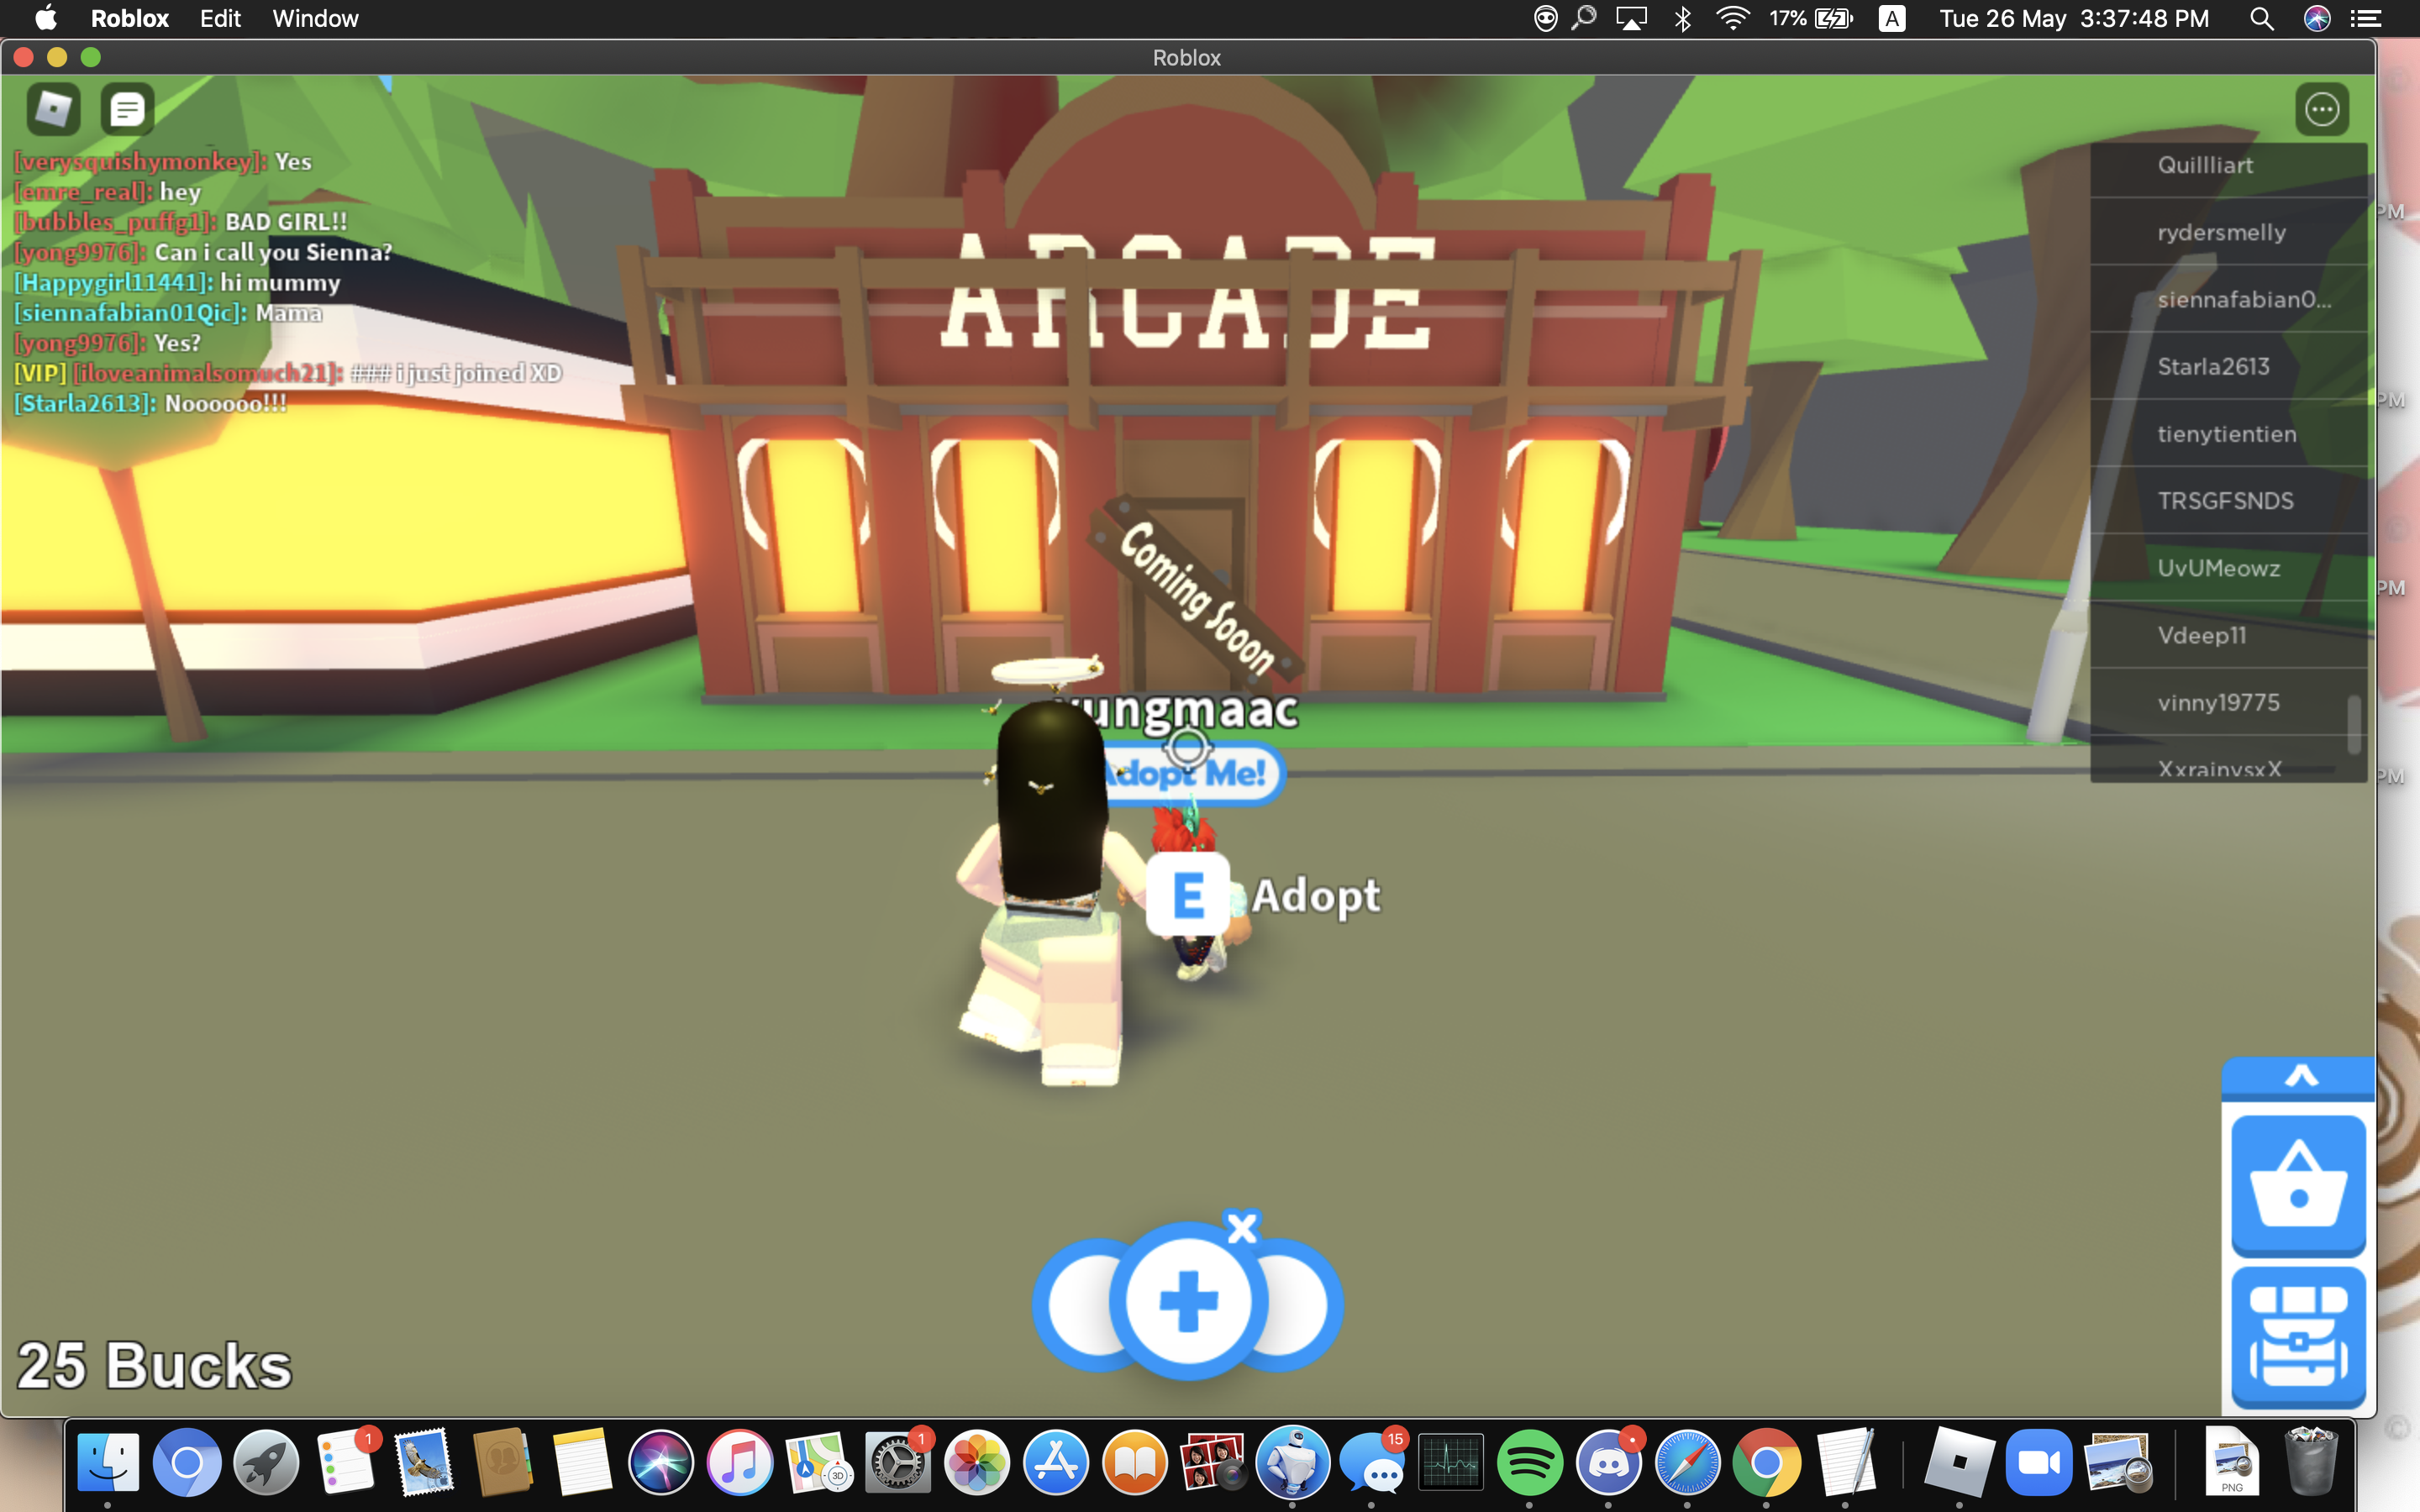 Went And Played Adopt Me Legacy D Link Below Fandom - roblox adopt me codes 2017